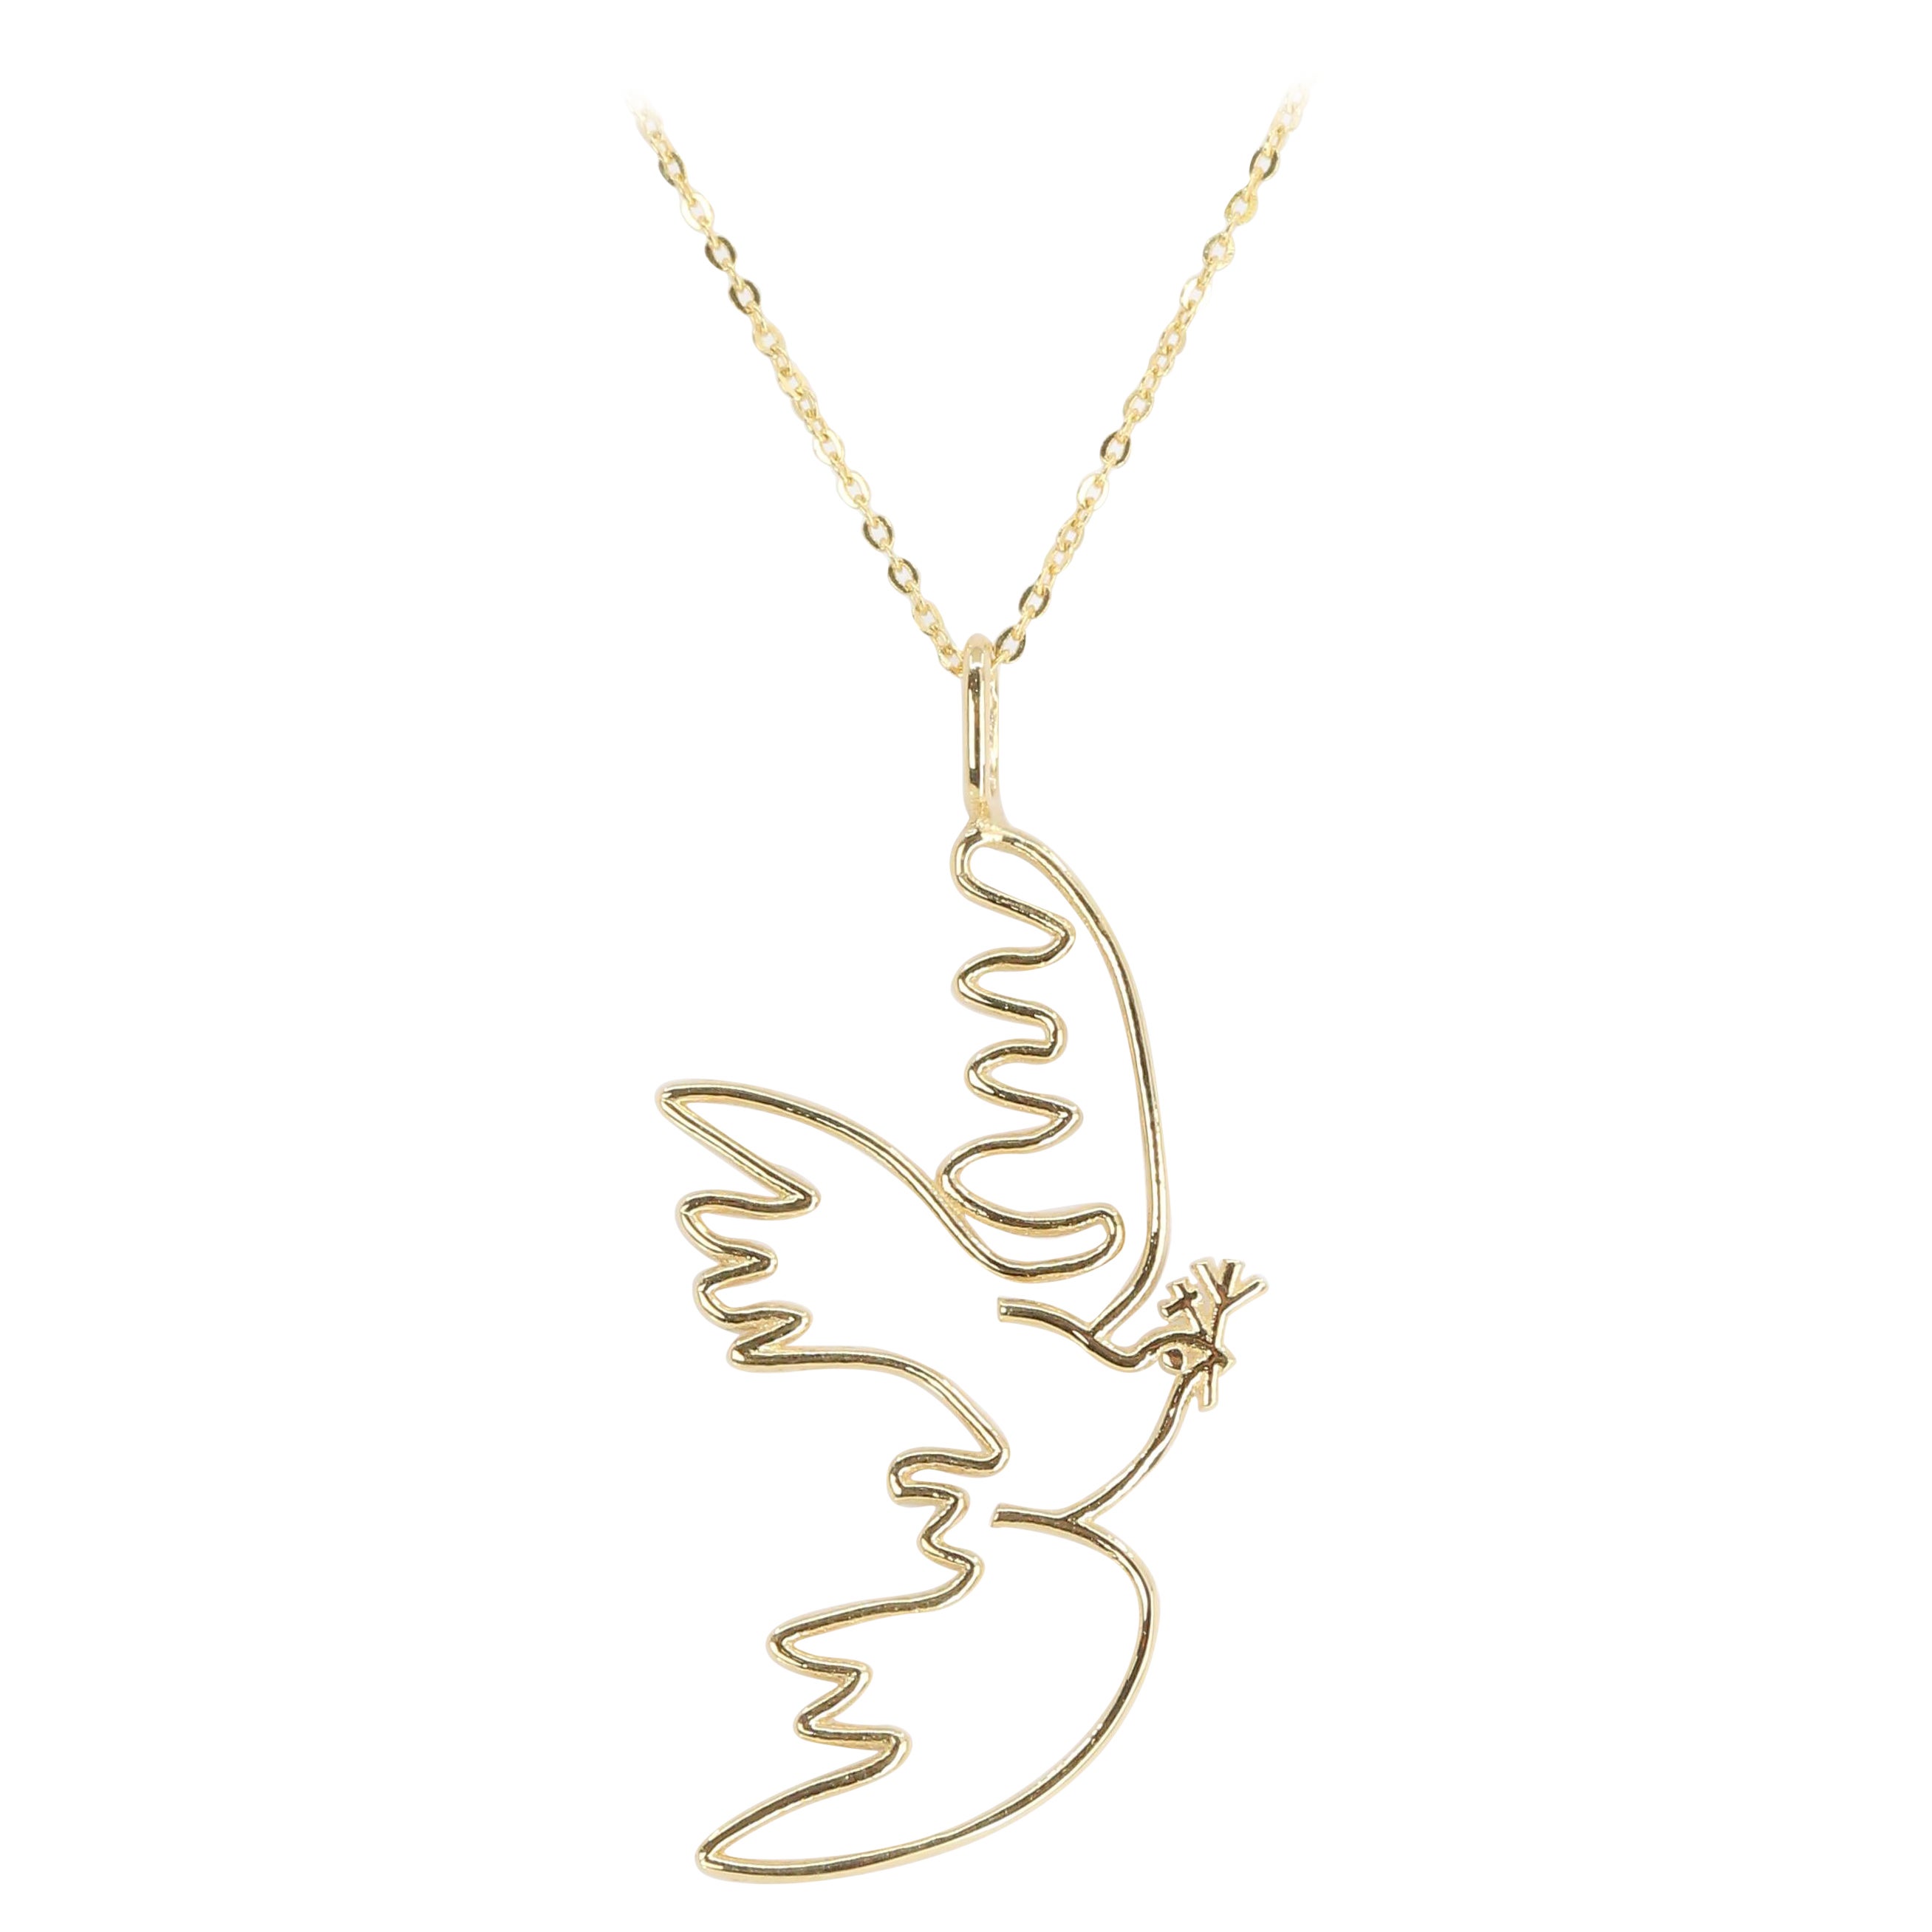 14K Gold Cubic Dove Necklace, Inspired by Picasso's "For a Beautiful Spring" For Sale